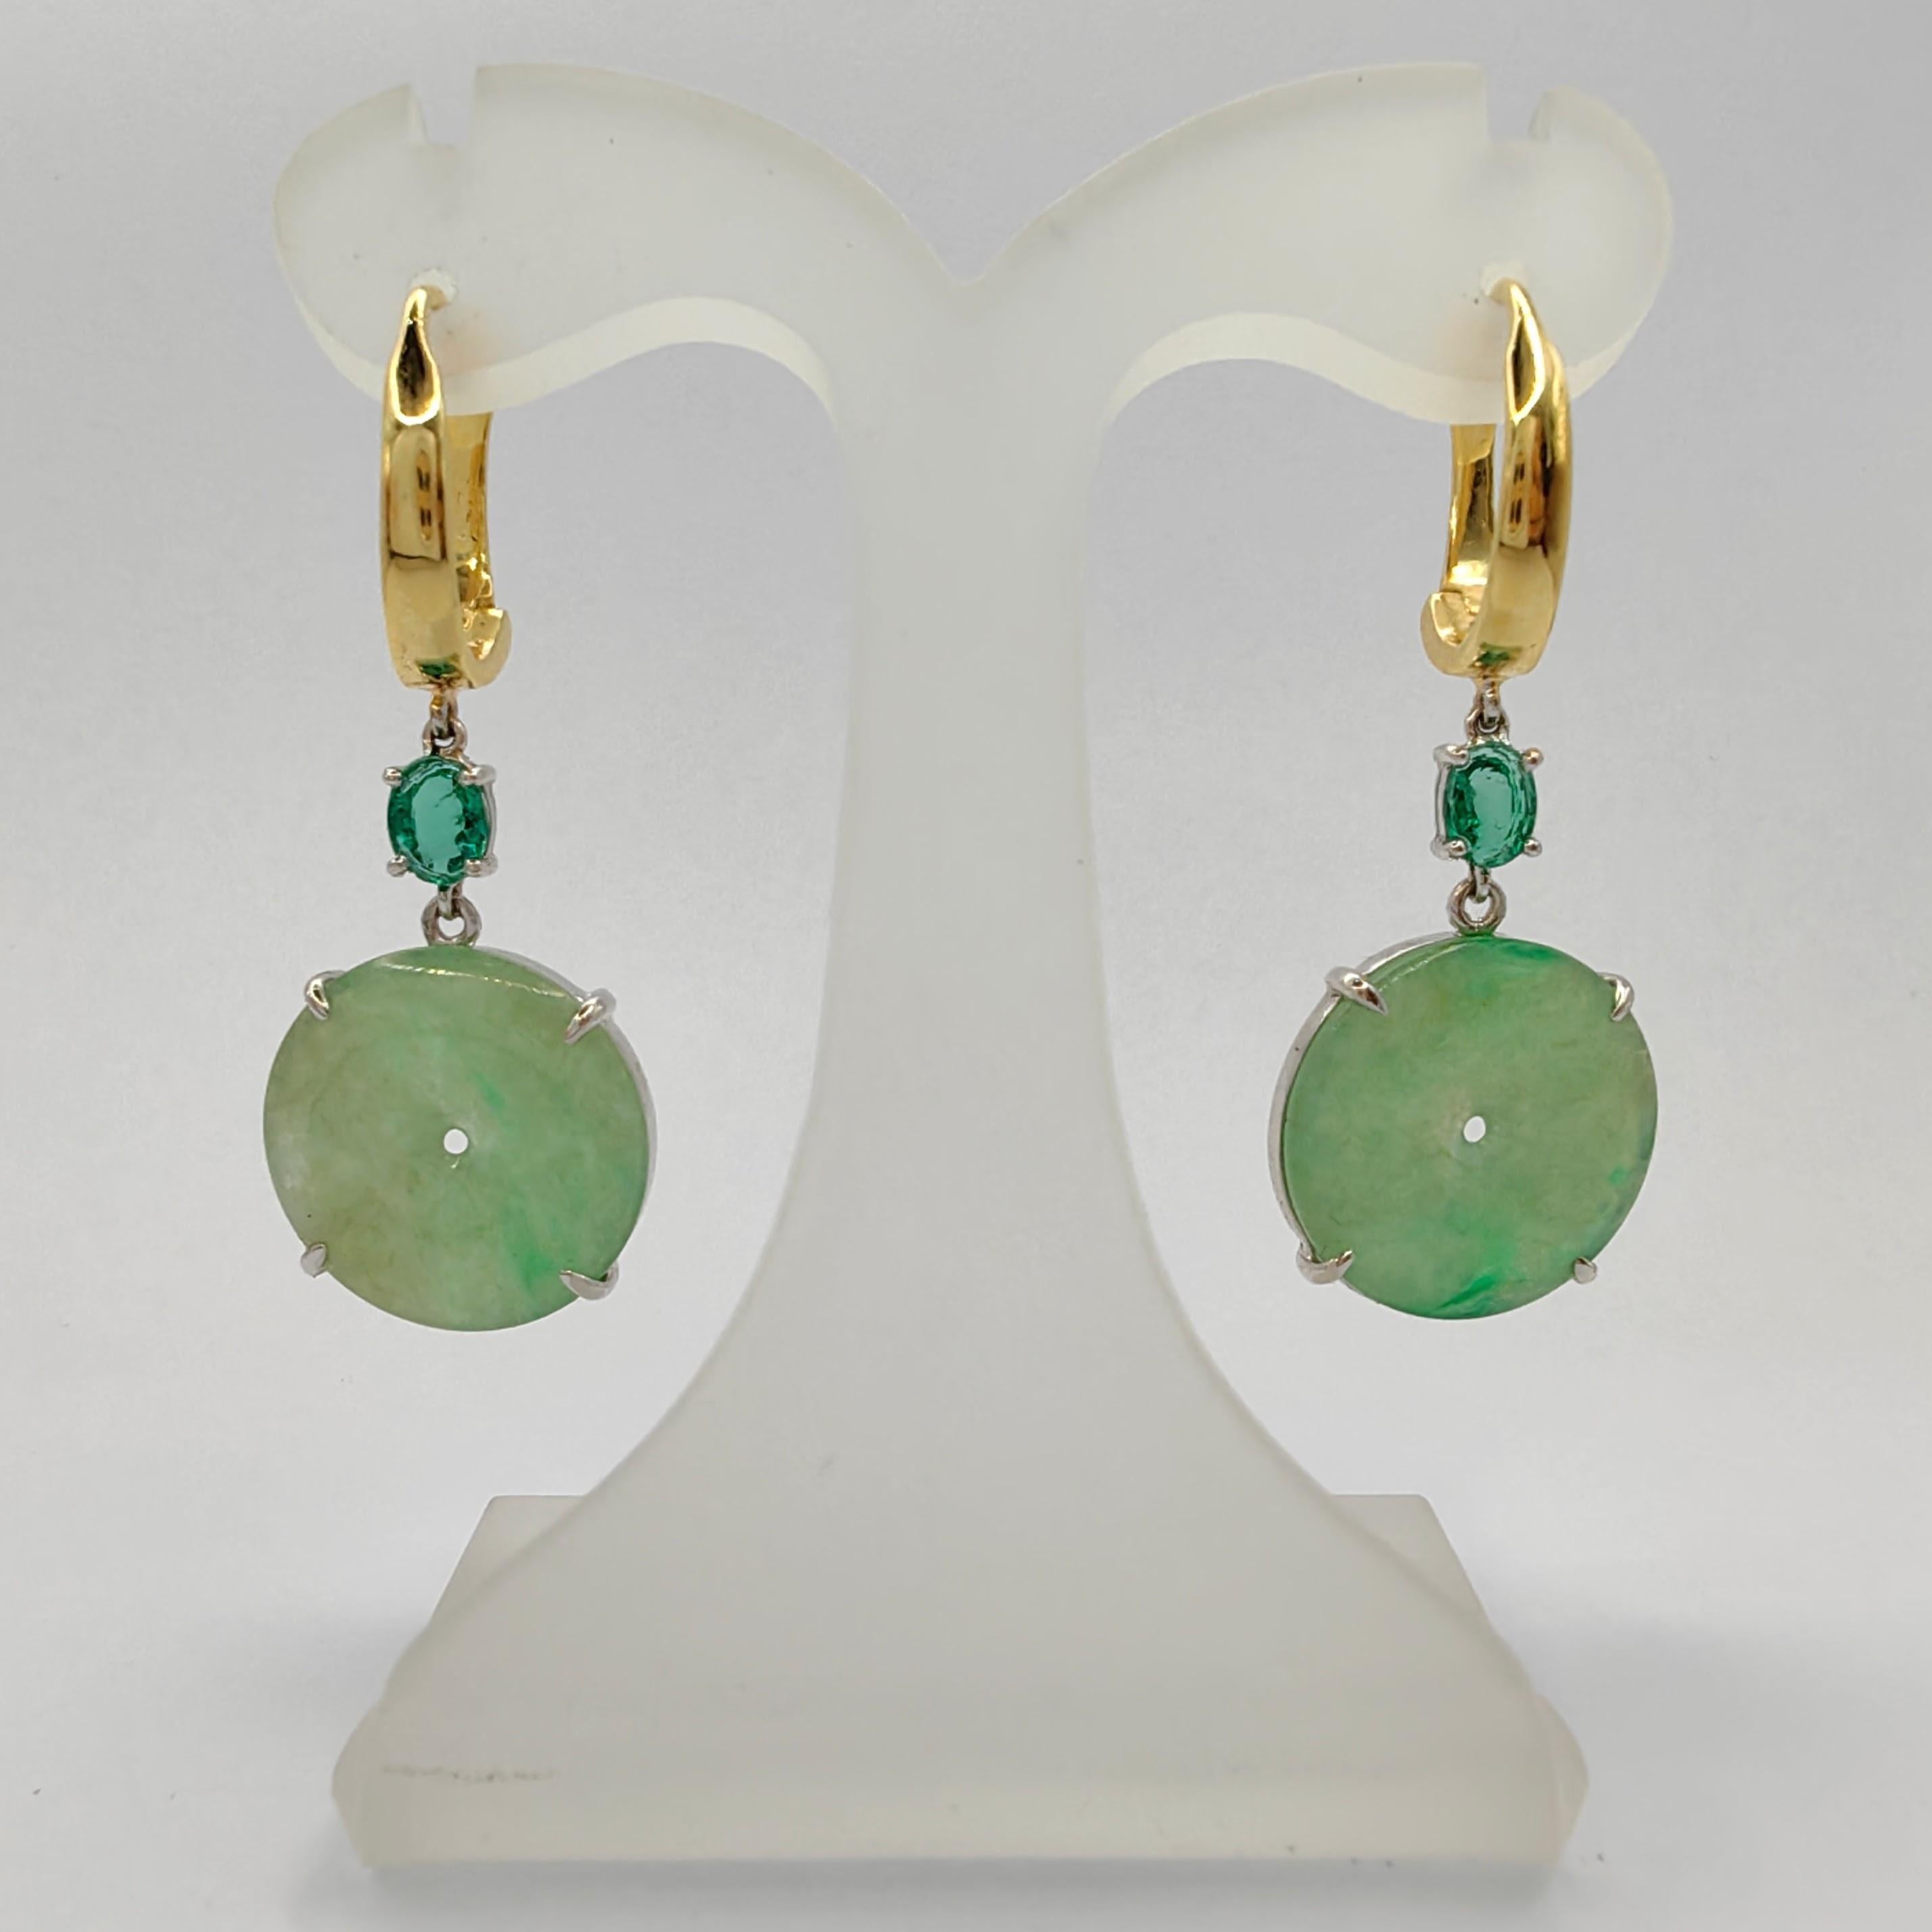 Introducing our exquisite Burmese Jadeite Jade Donut & Emerald Dangling Earrings in 18K Two-tone Gold, a harmonious fusion of nature's beauty and artisanal craftsmanship.

These captivating earrings feature two remarkable donut-shaped Burmese